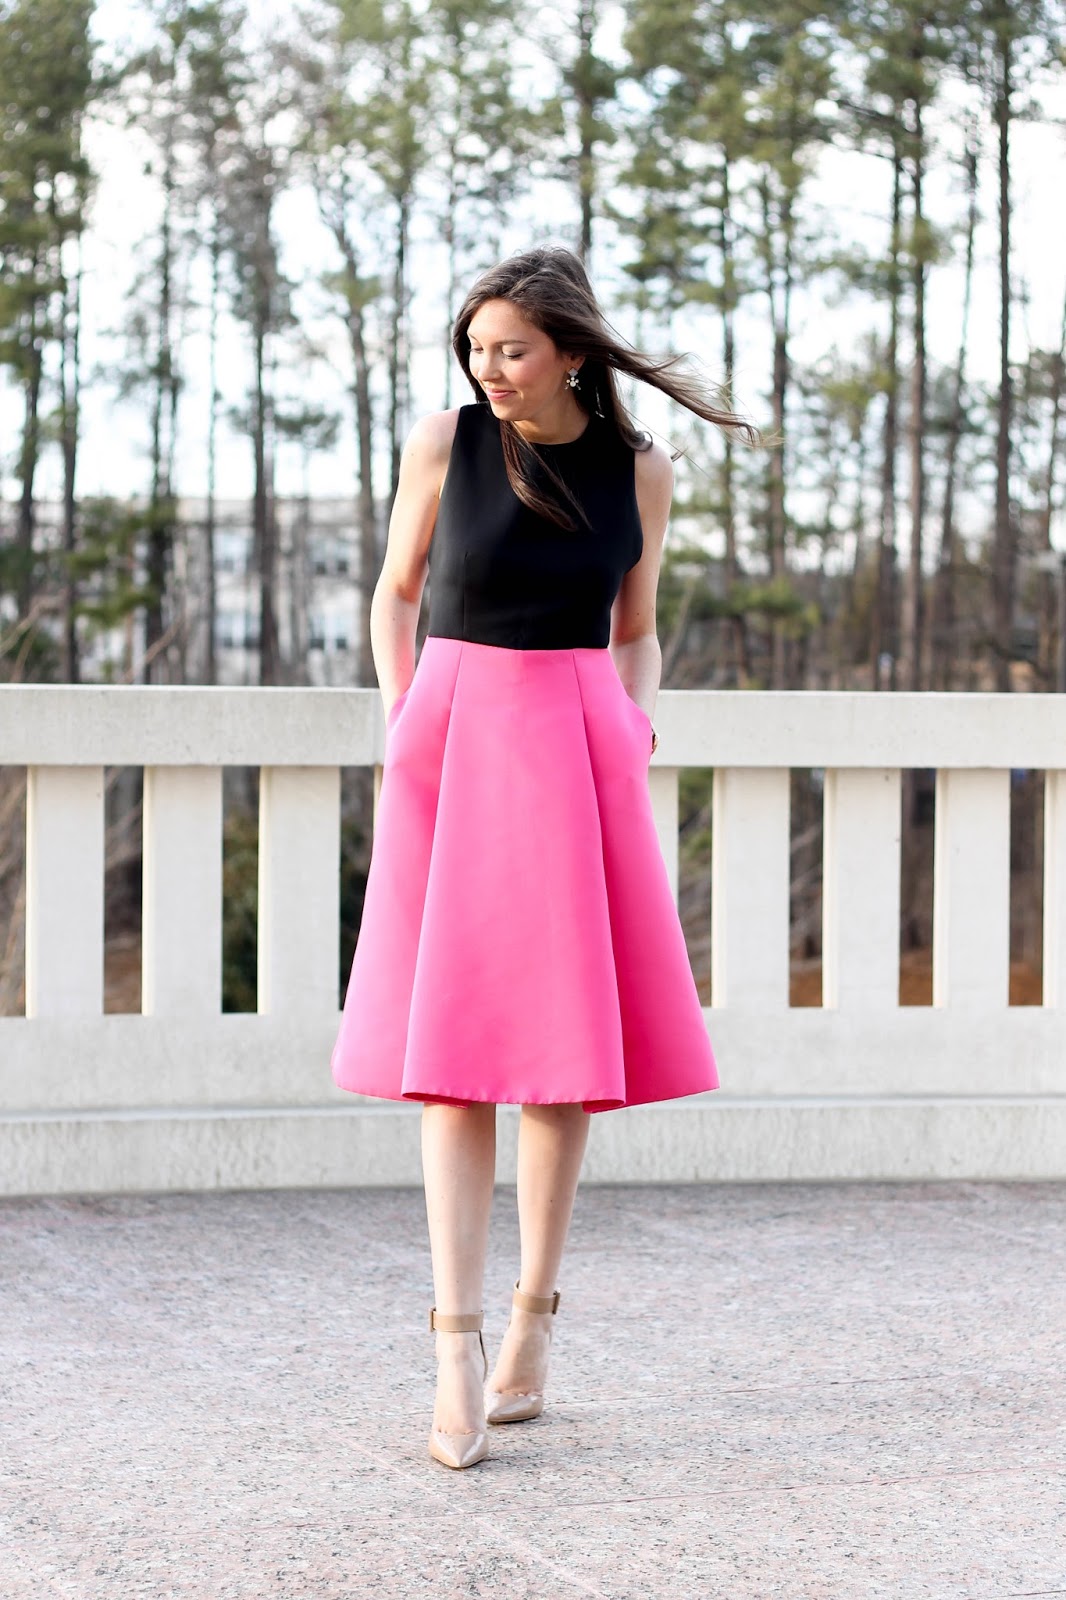 Kate Spade Bow back colorblock dress, Rent the Runway Valentine's dress, Rent the Runway wedding dress idea, NC Fashion Blogger, Stella Dot earrings, fossil tan leather watch with rose gold face, pretty in the pines blog